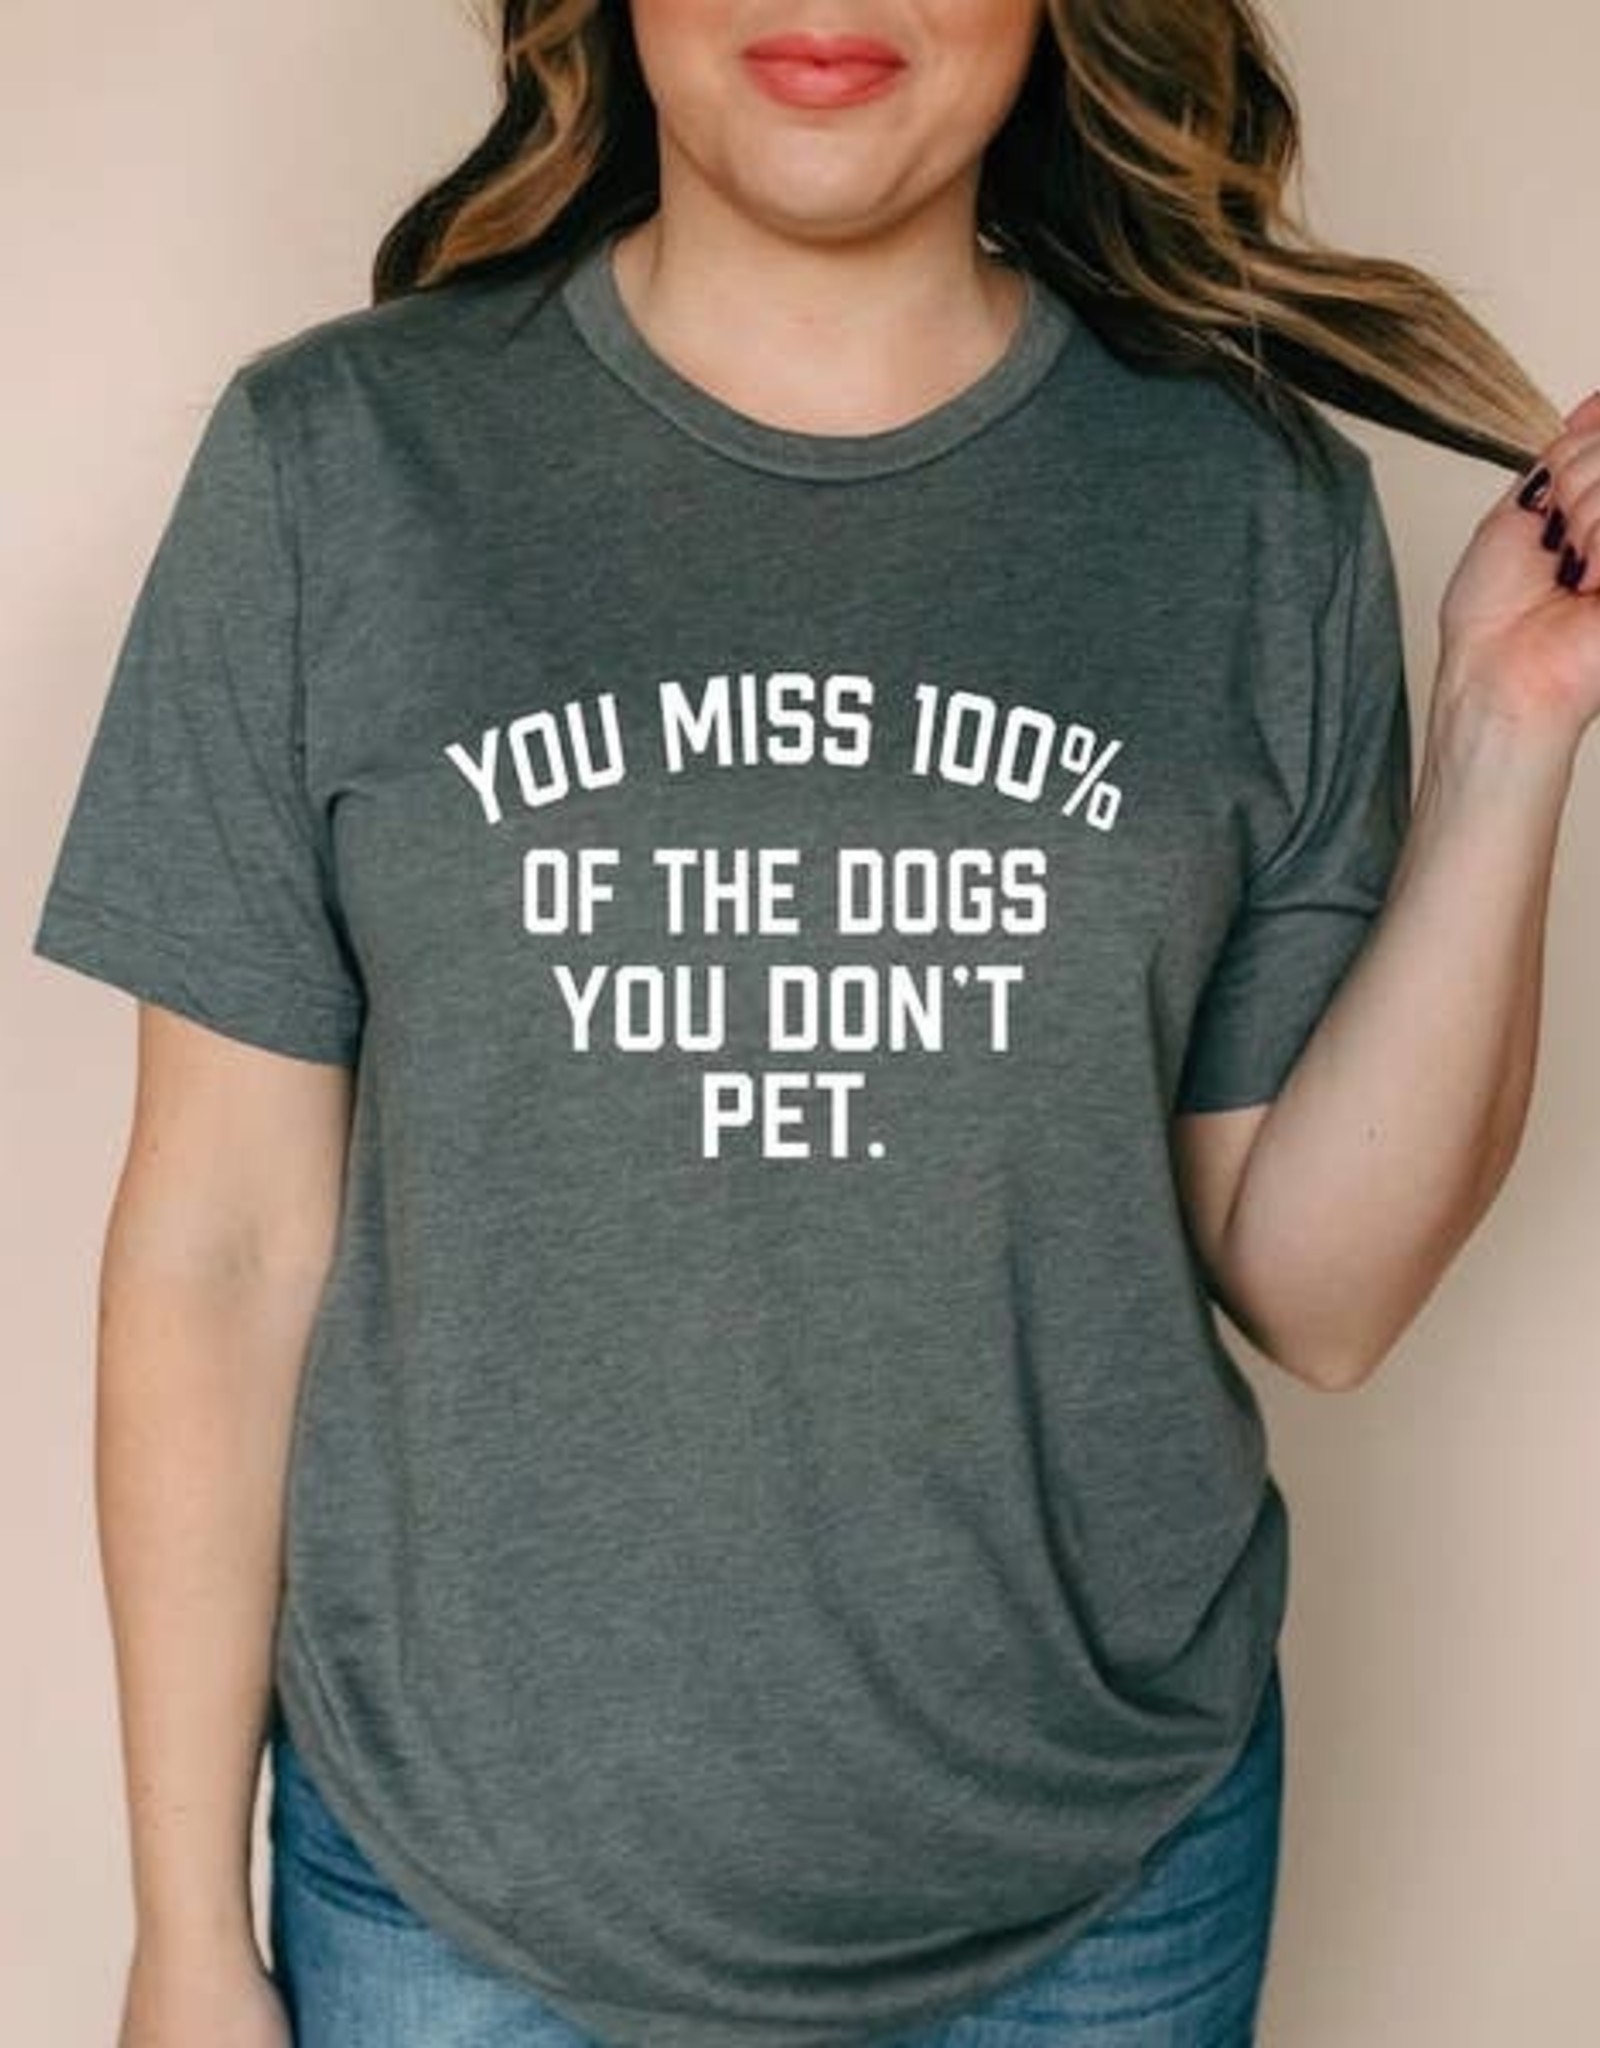 Bubs' & Betty's You Miss 100% of the Dogs You Don't Pet Shirt